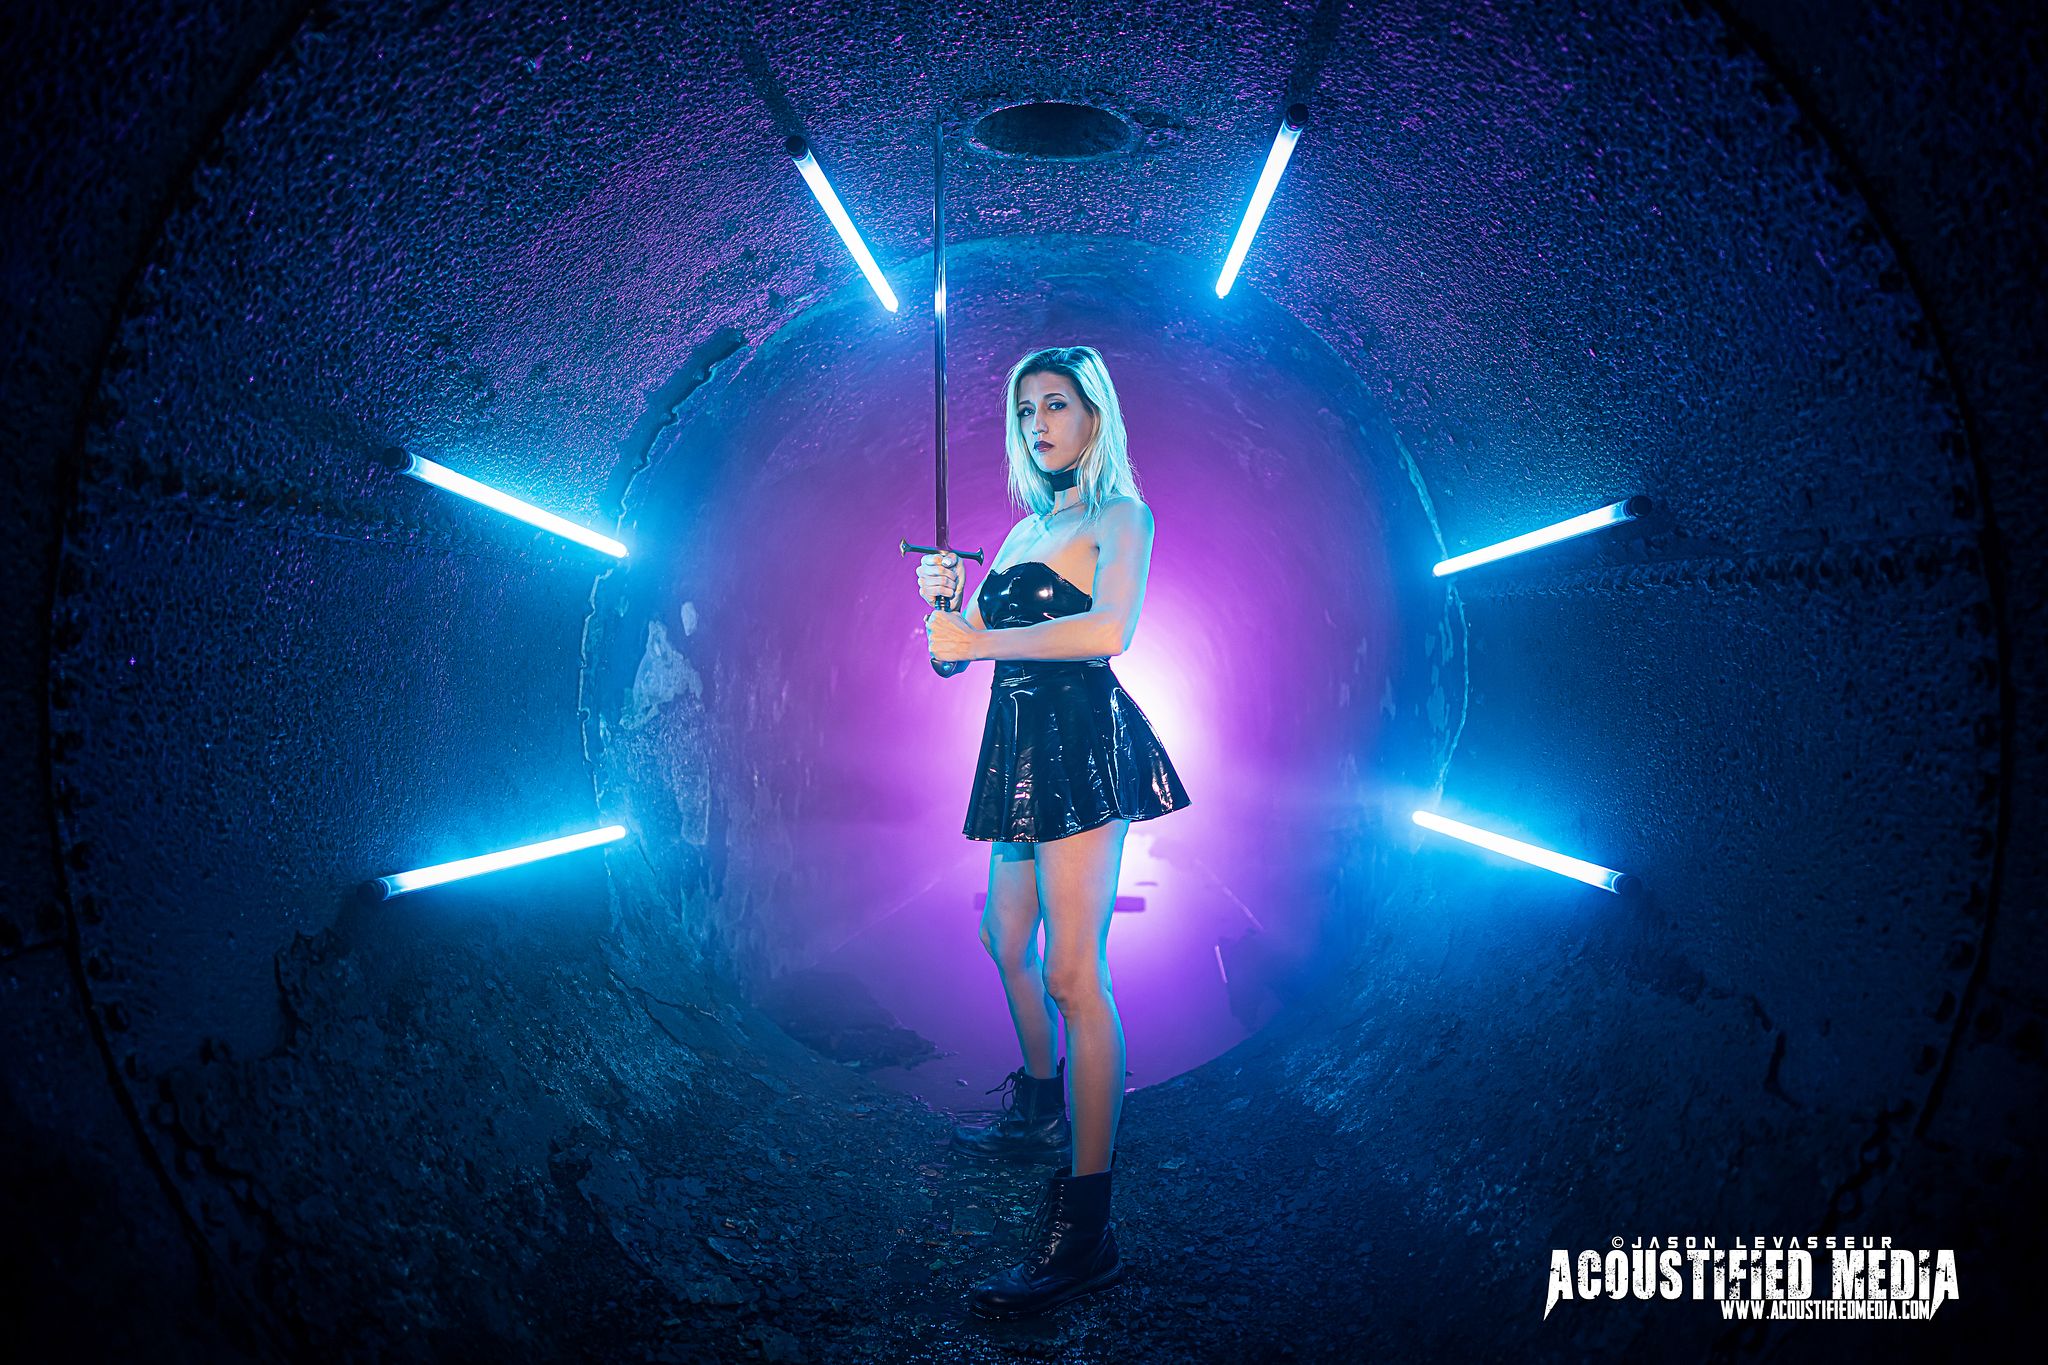 Photoshoot in "The Tunnel"